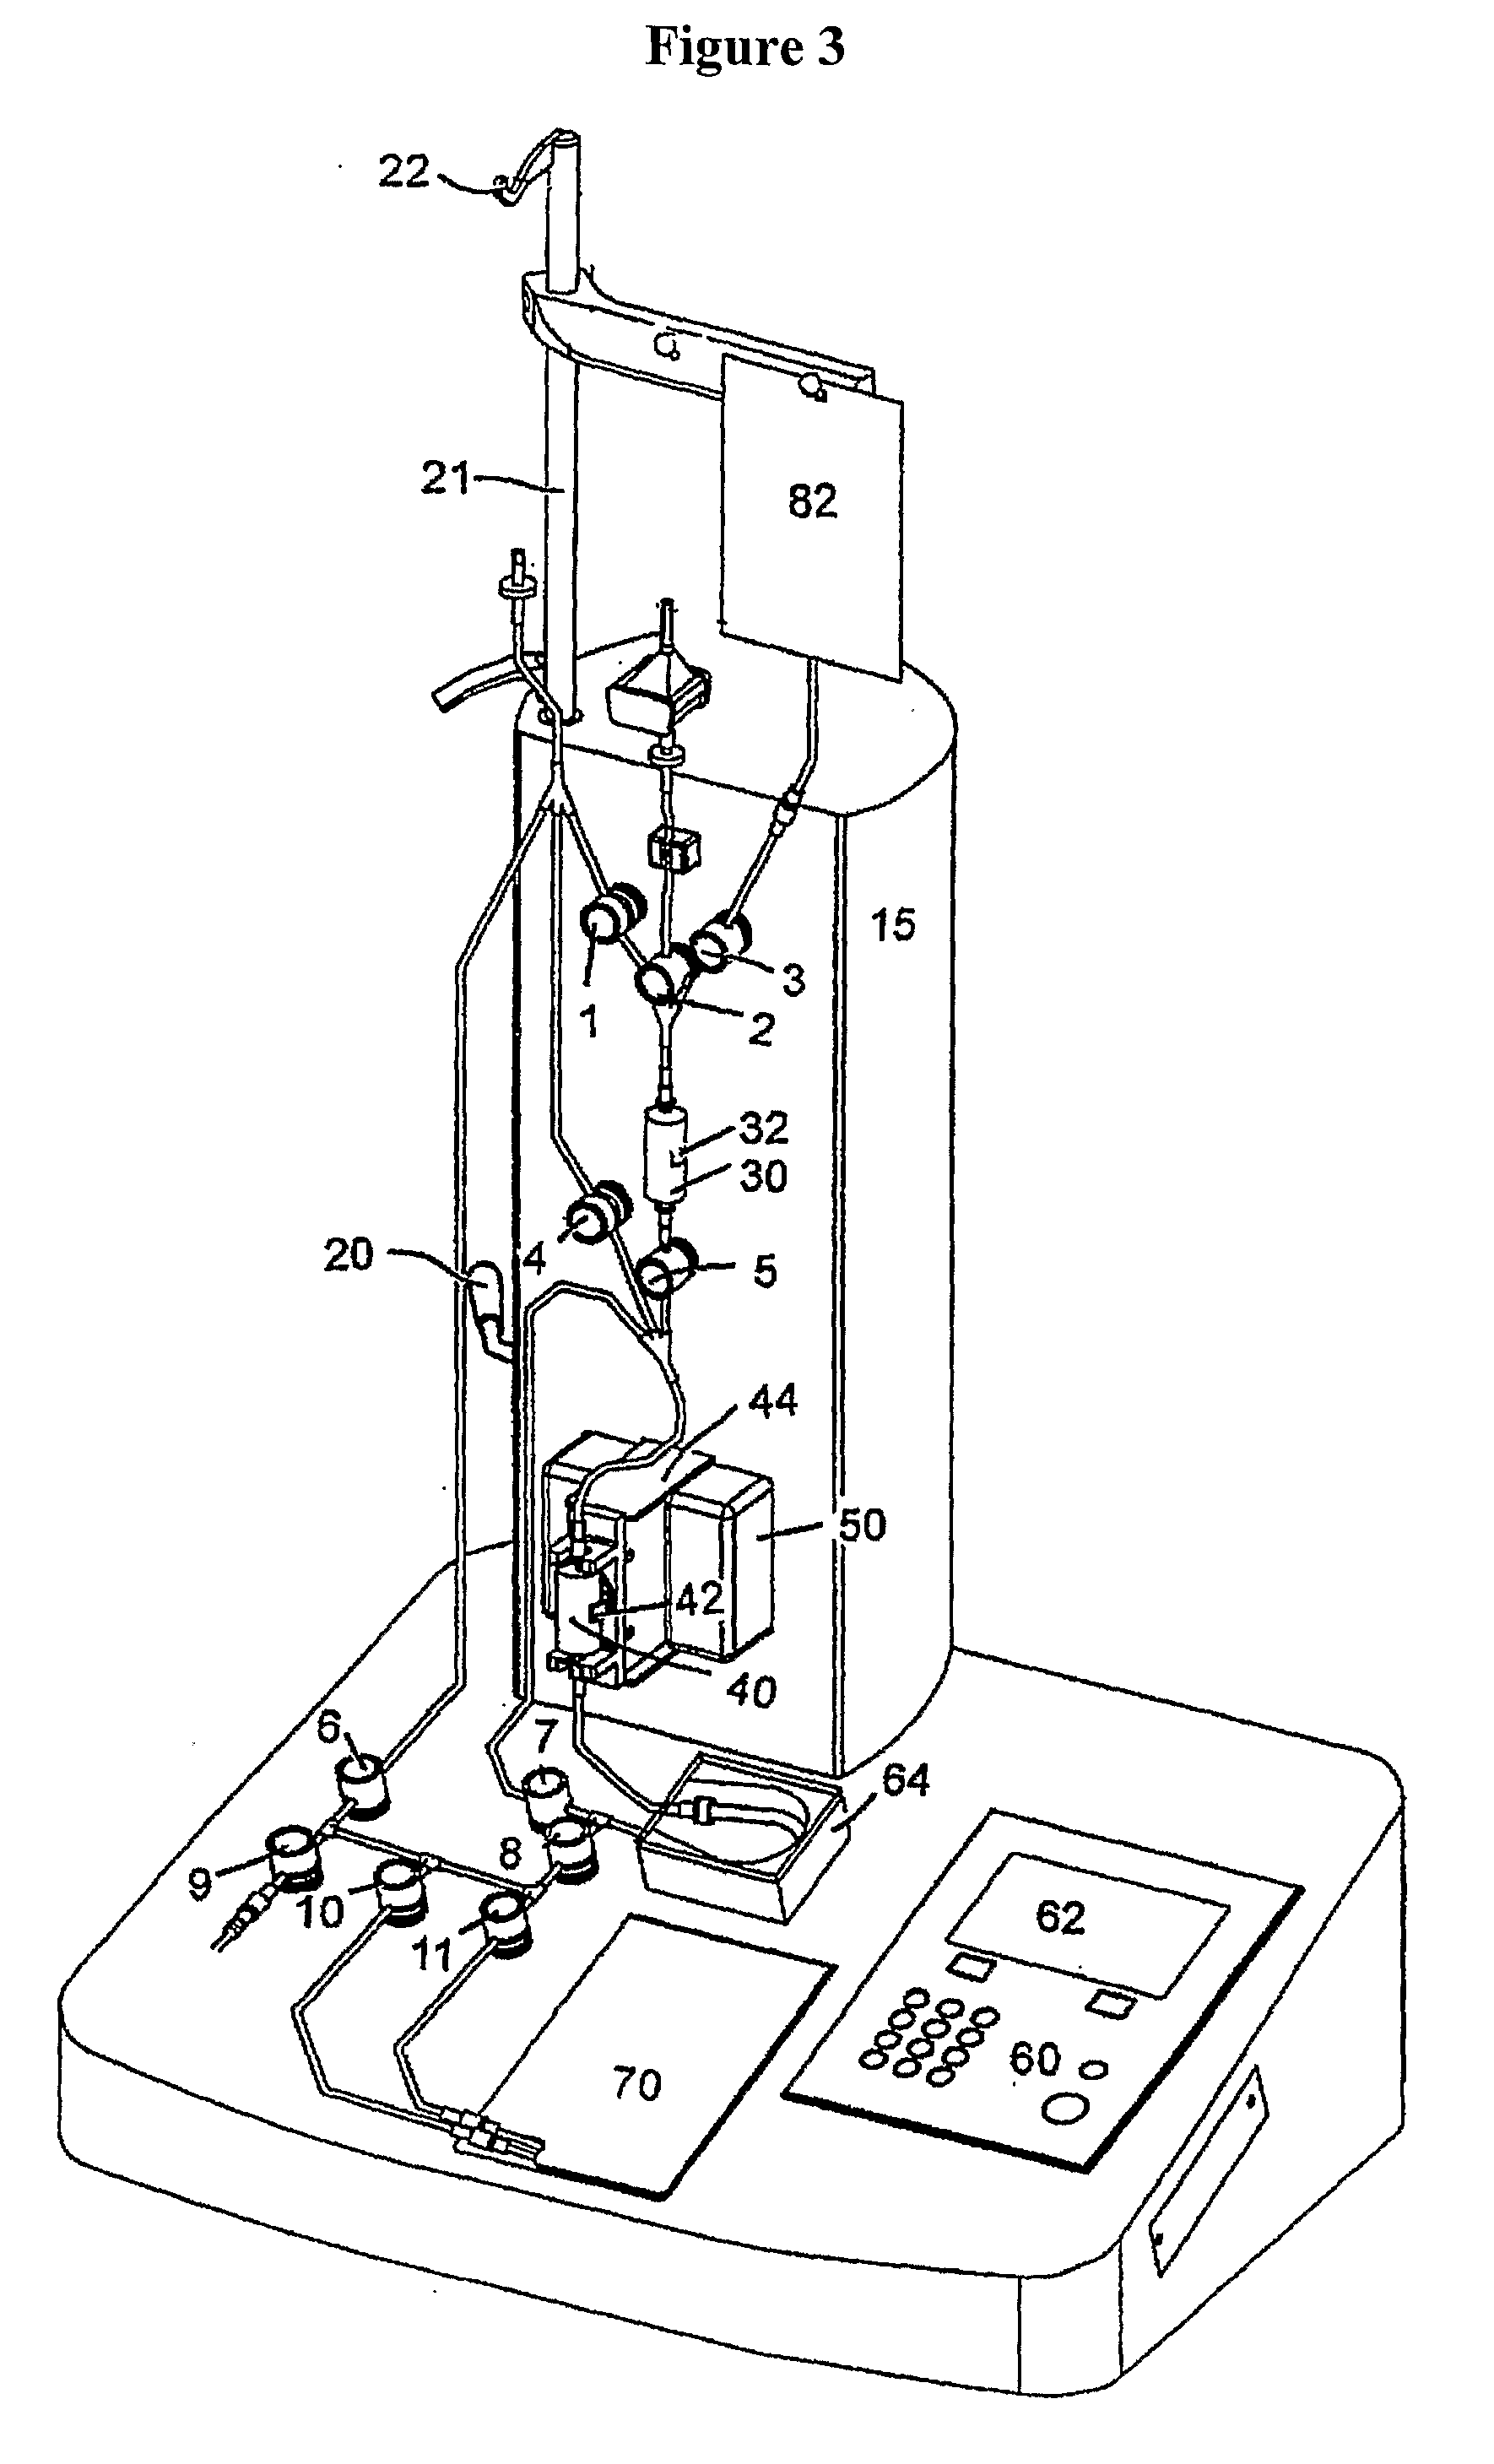 Sample Processing System and Methods